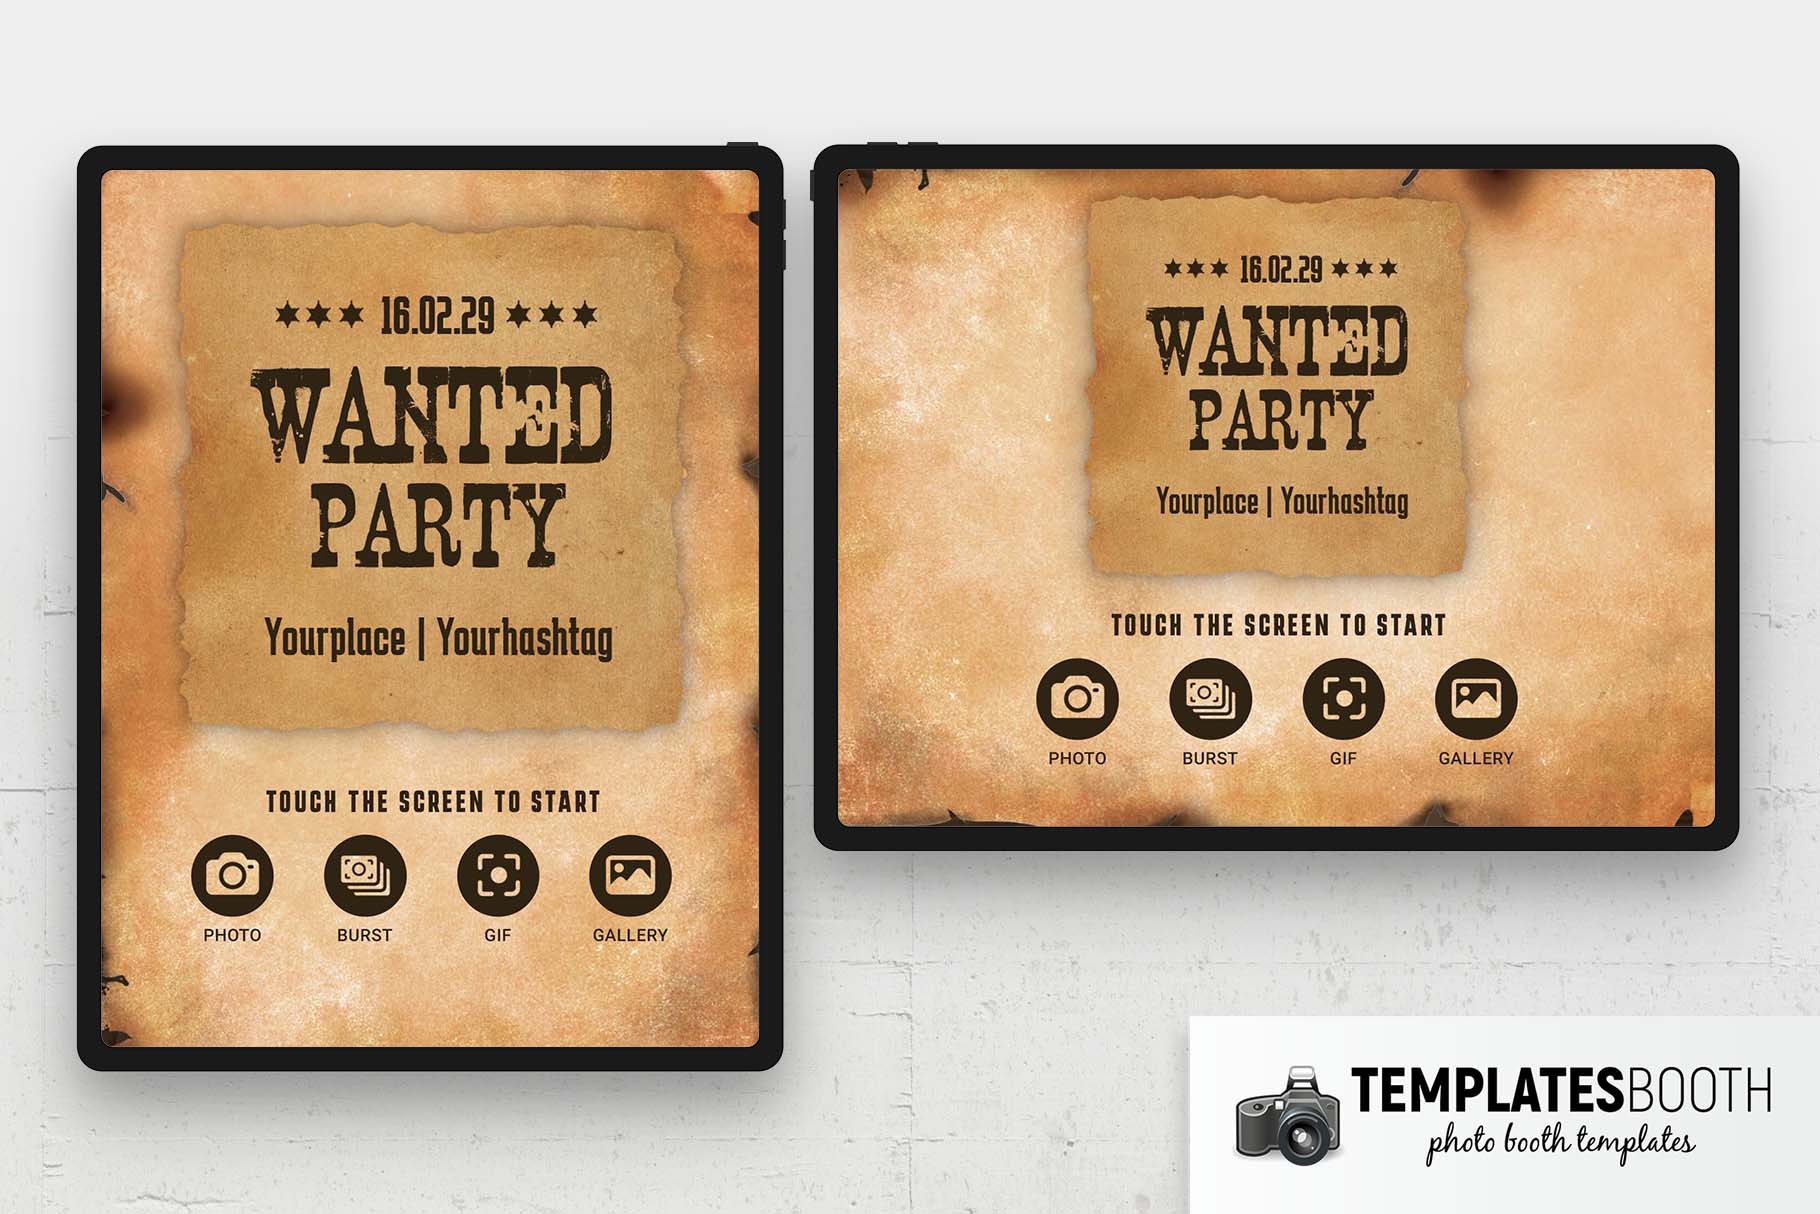 Wanted Poster Photo Booth Welcome Screen